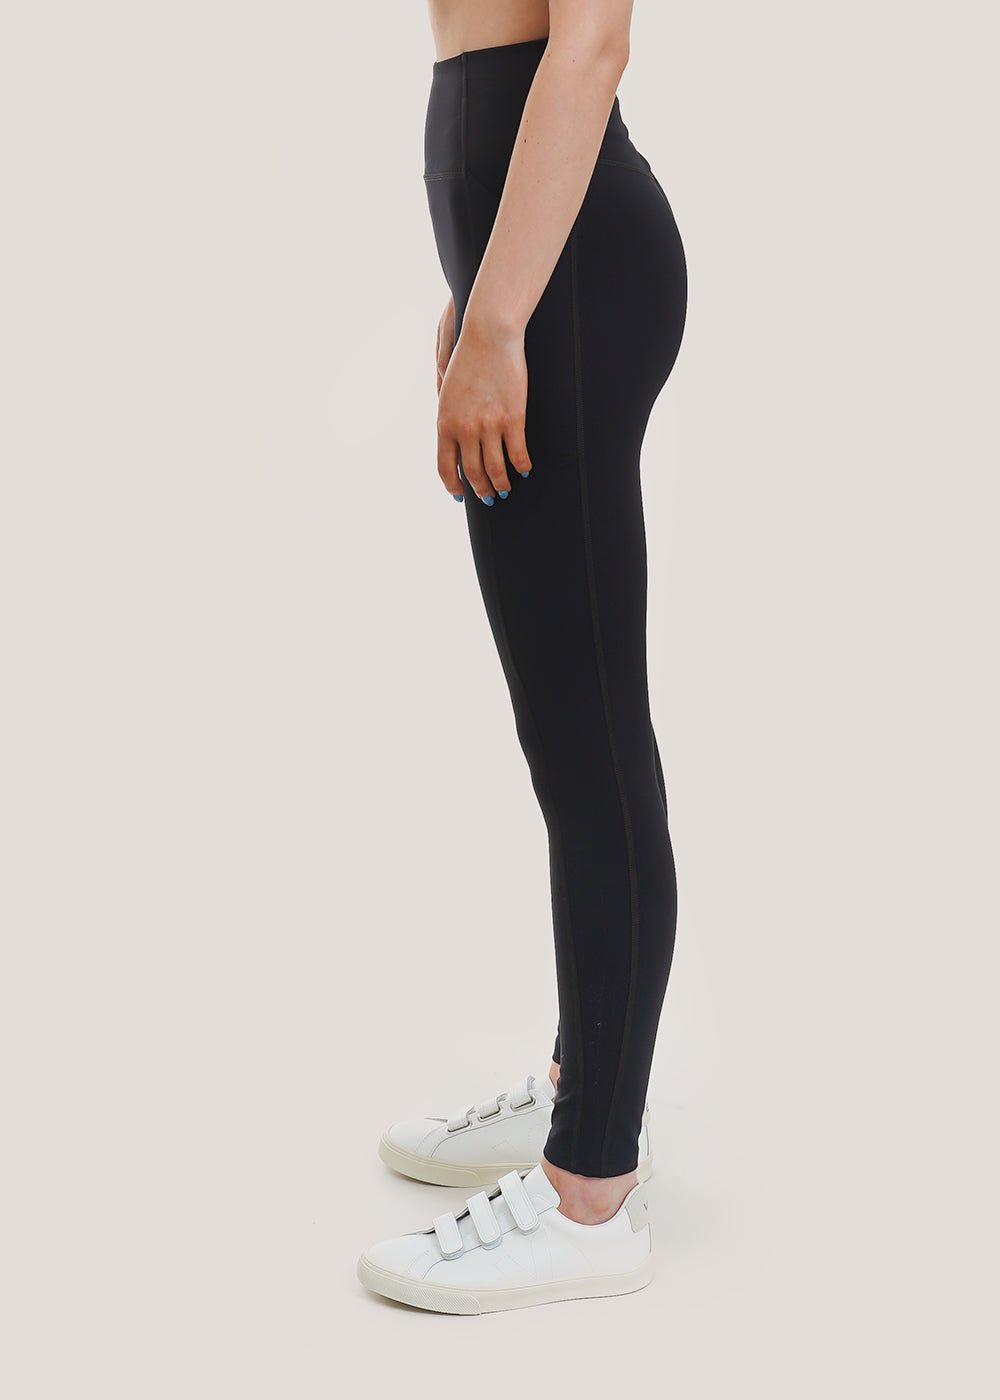 Buy Exp Realty Leggings With Pockets, Exp Realty Crossover Leggings With  Pockets, Exp Realtor Leggings, Exp Athletic Wear, Real Estate Leggings  Online in India 